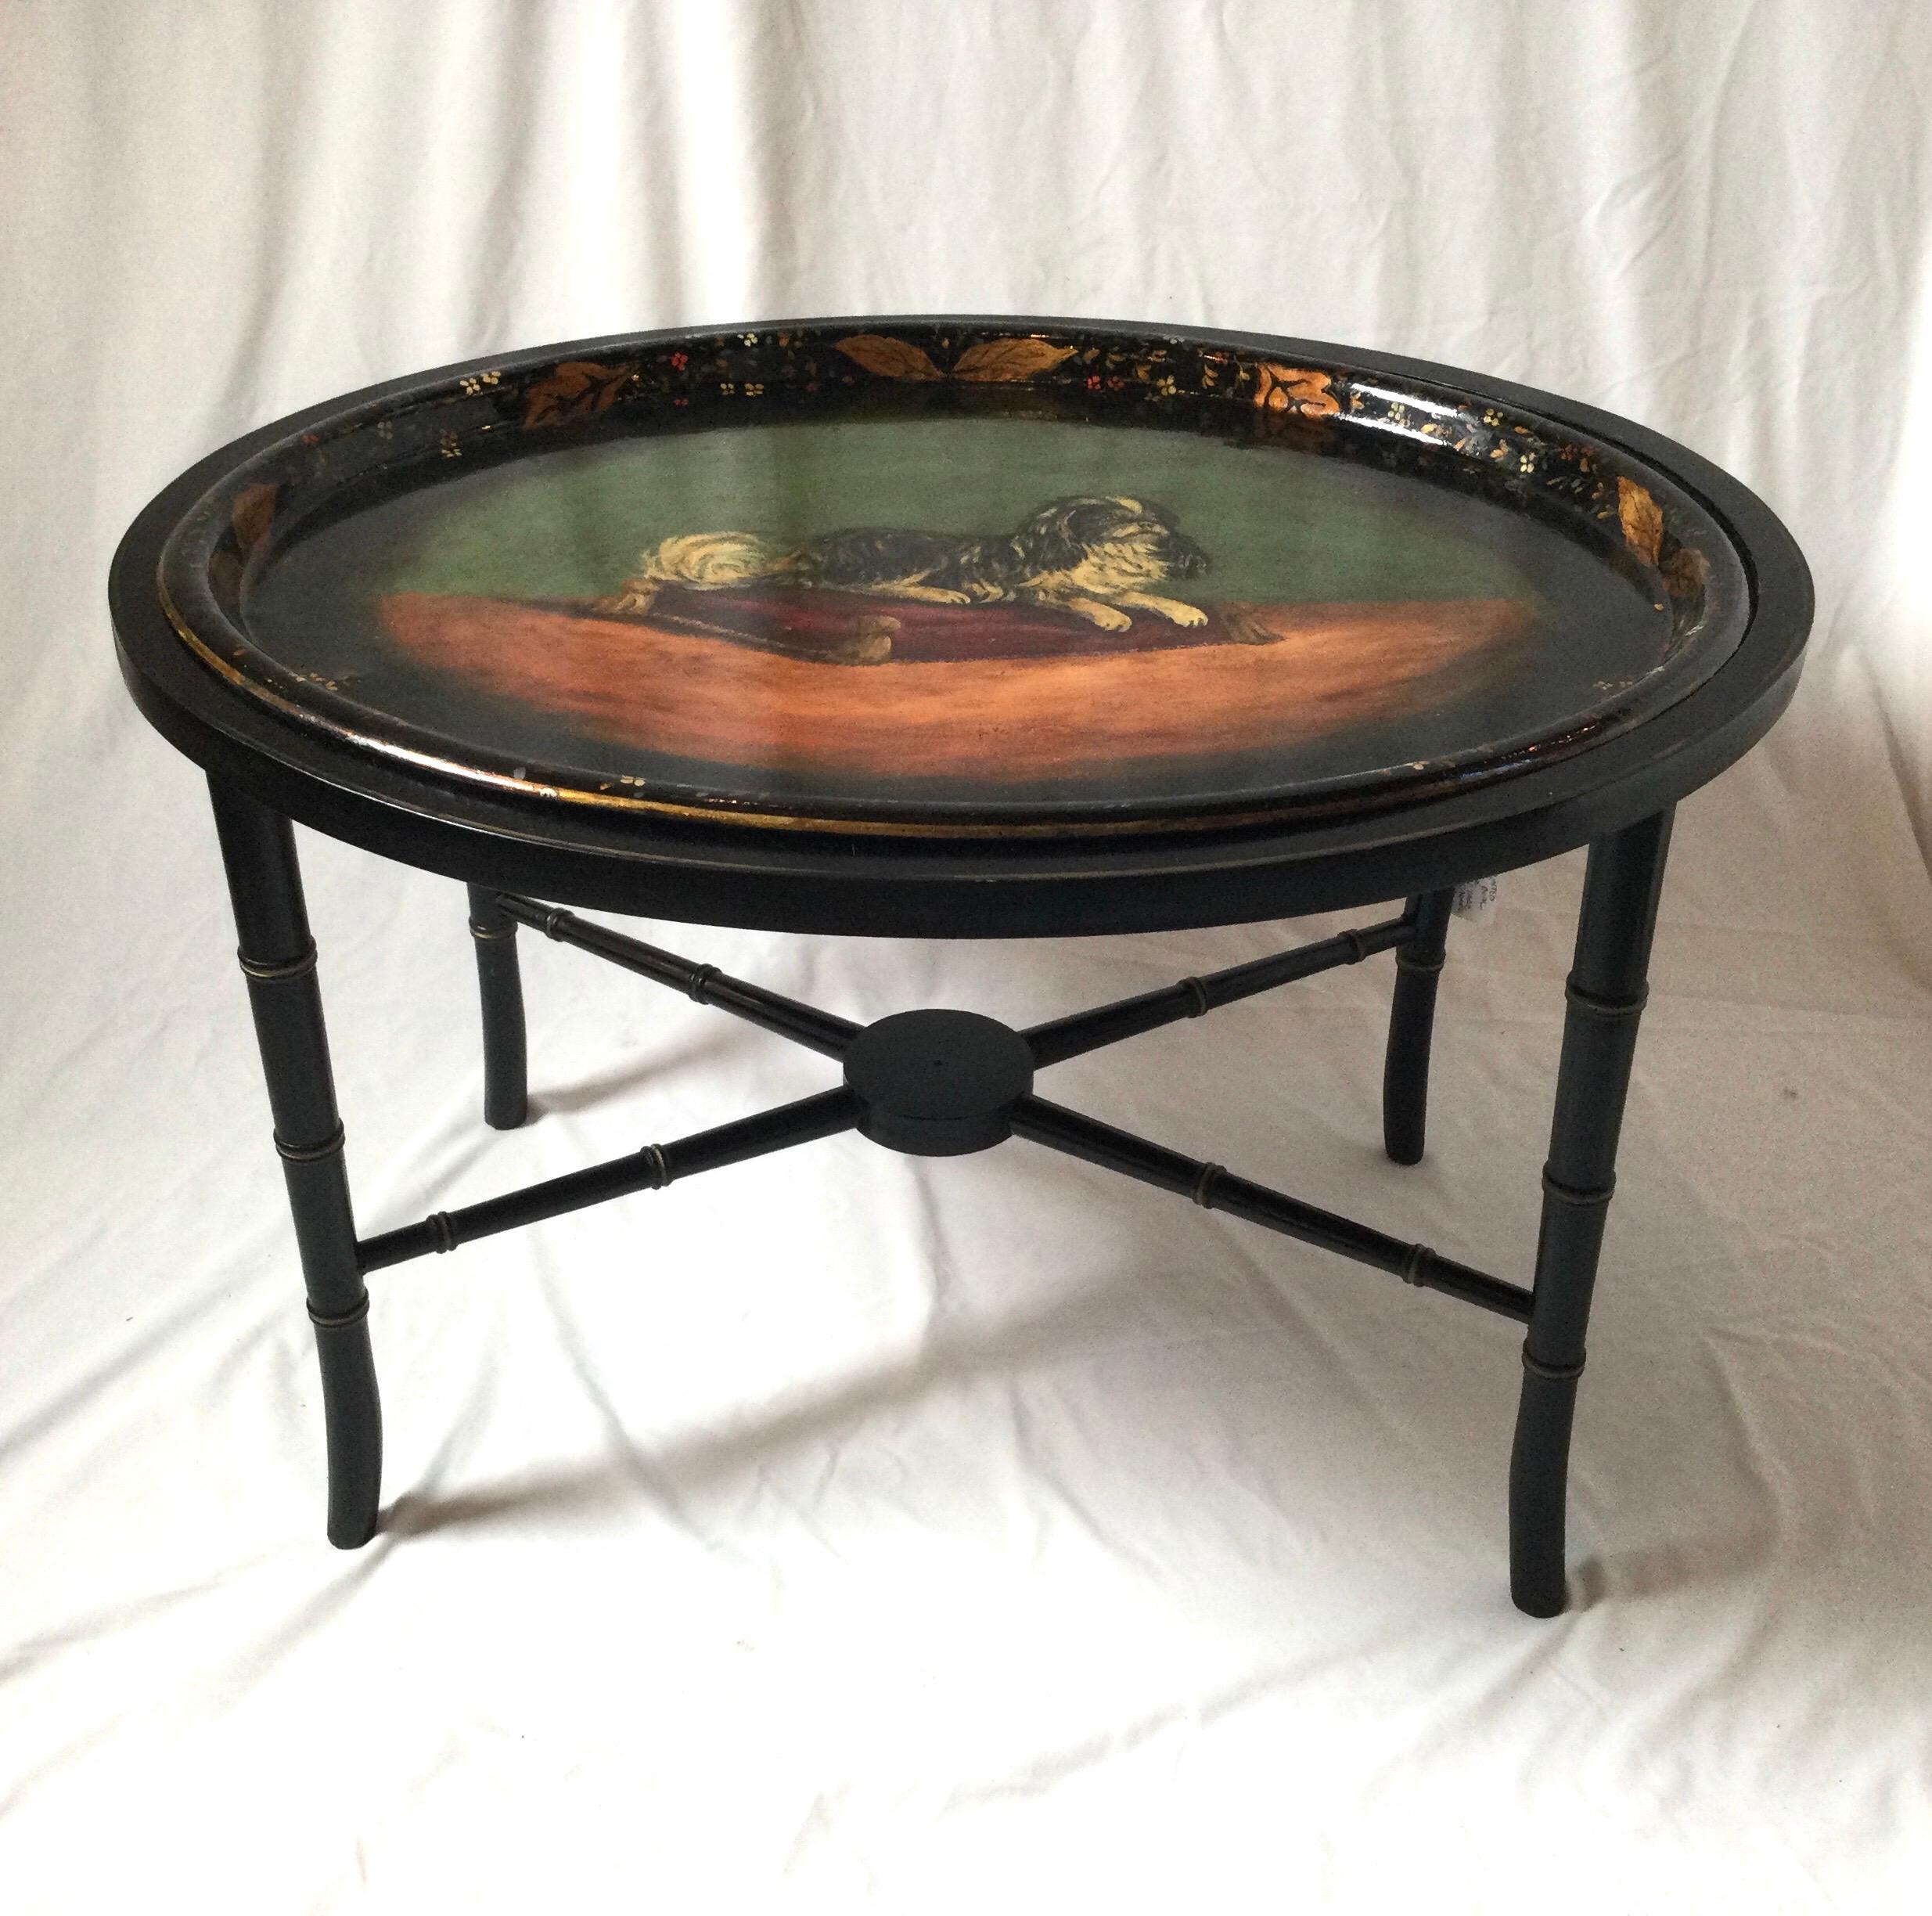 Hand painted King Charles Spaniel tray cocktail table with faux bamboo fitted base. Floral design around edges of tray. Some minor wear to gold around edges and perimeter of table. Oval table measures 30 by 24